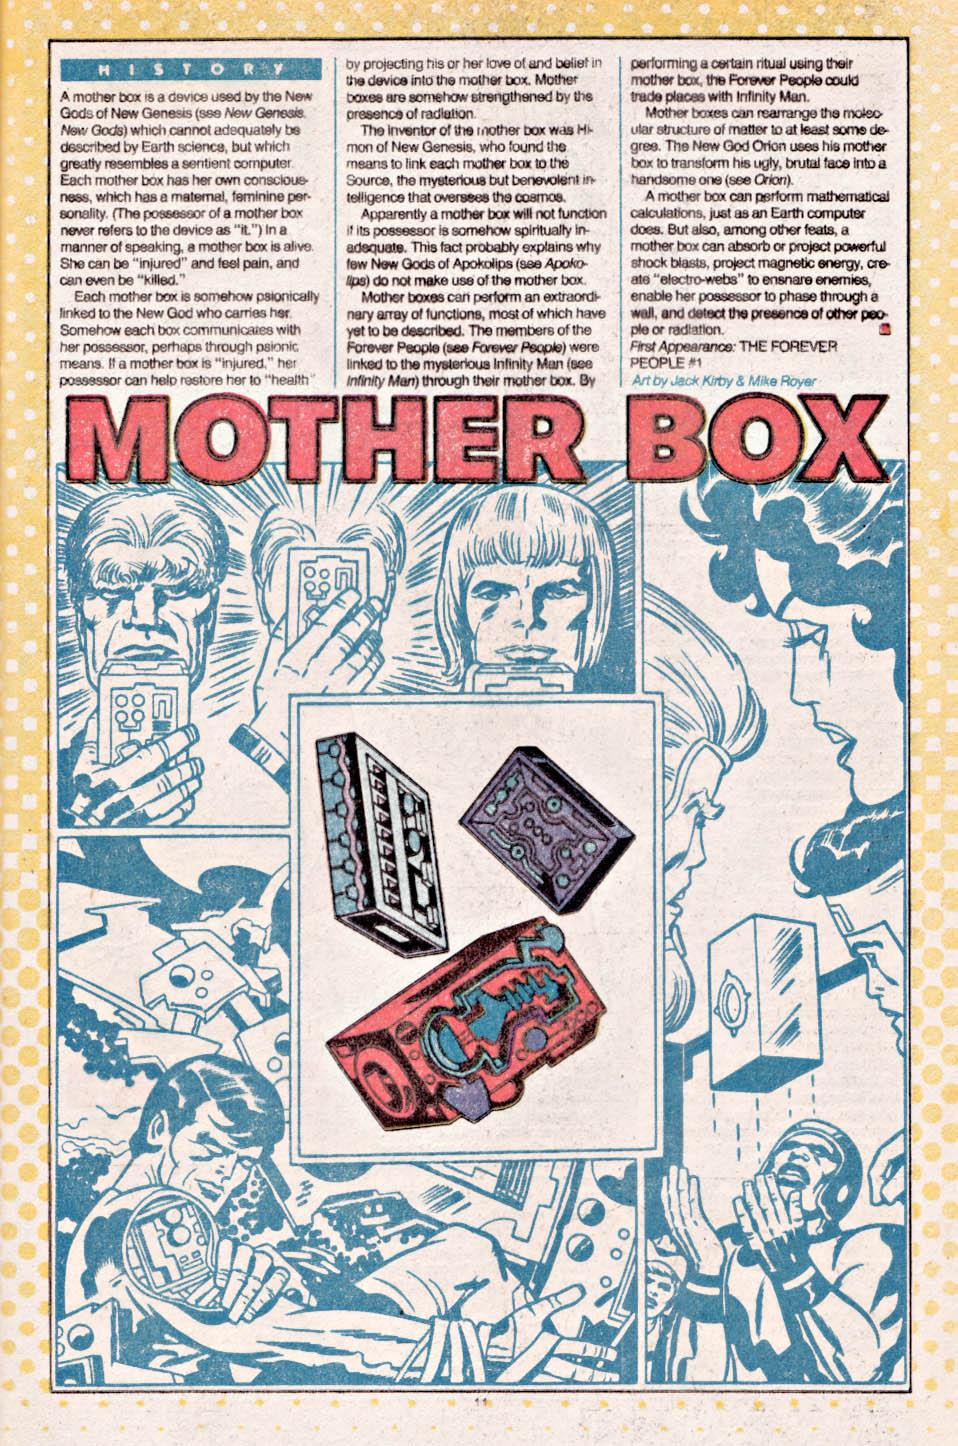 Whos-Who-The-Definitive-Directory-of-the-DC-Universe-12-1986-Jack-Kirby-Mother-Box-Arkham-Comics-7-rue-Broca-75005-Paris.jpg